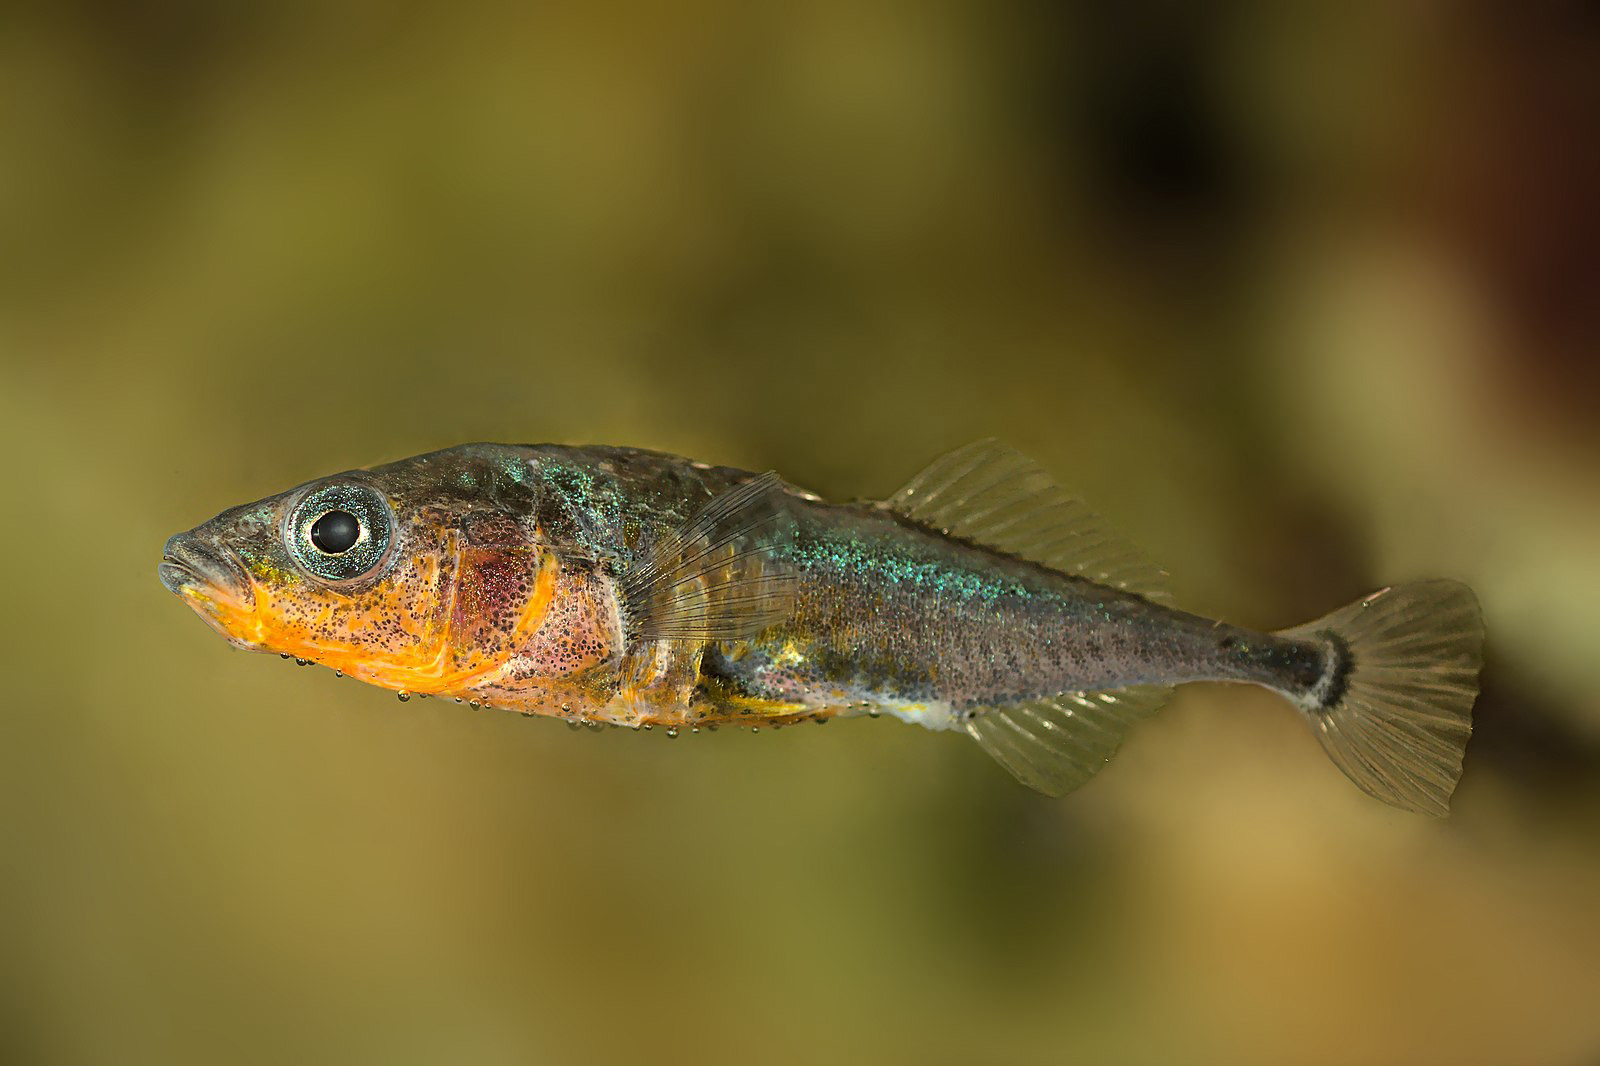 The researchers focused on sperm-mediated paternal effects and paternal care in Gasterosteus aculeatus or threespine sticklebacks.